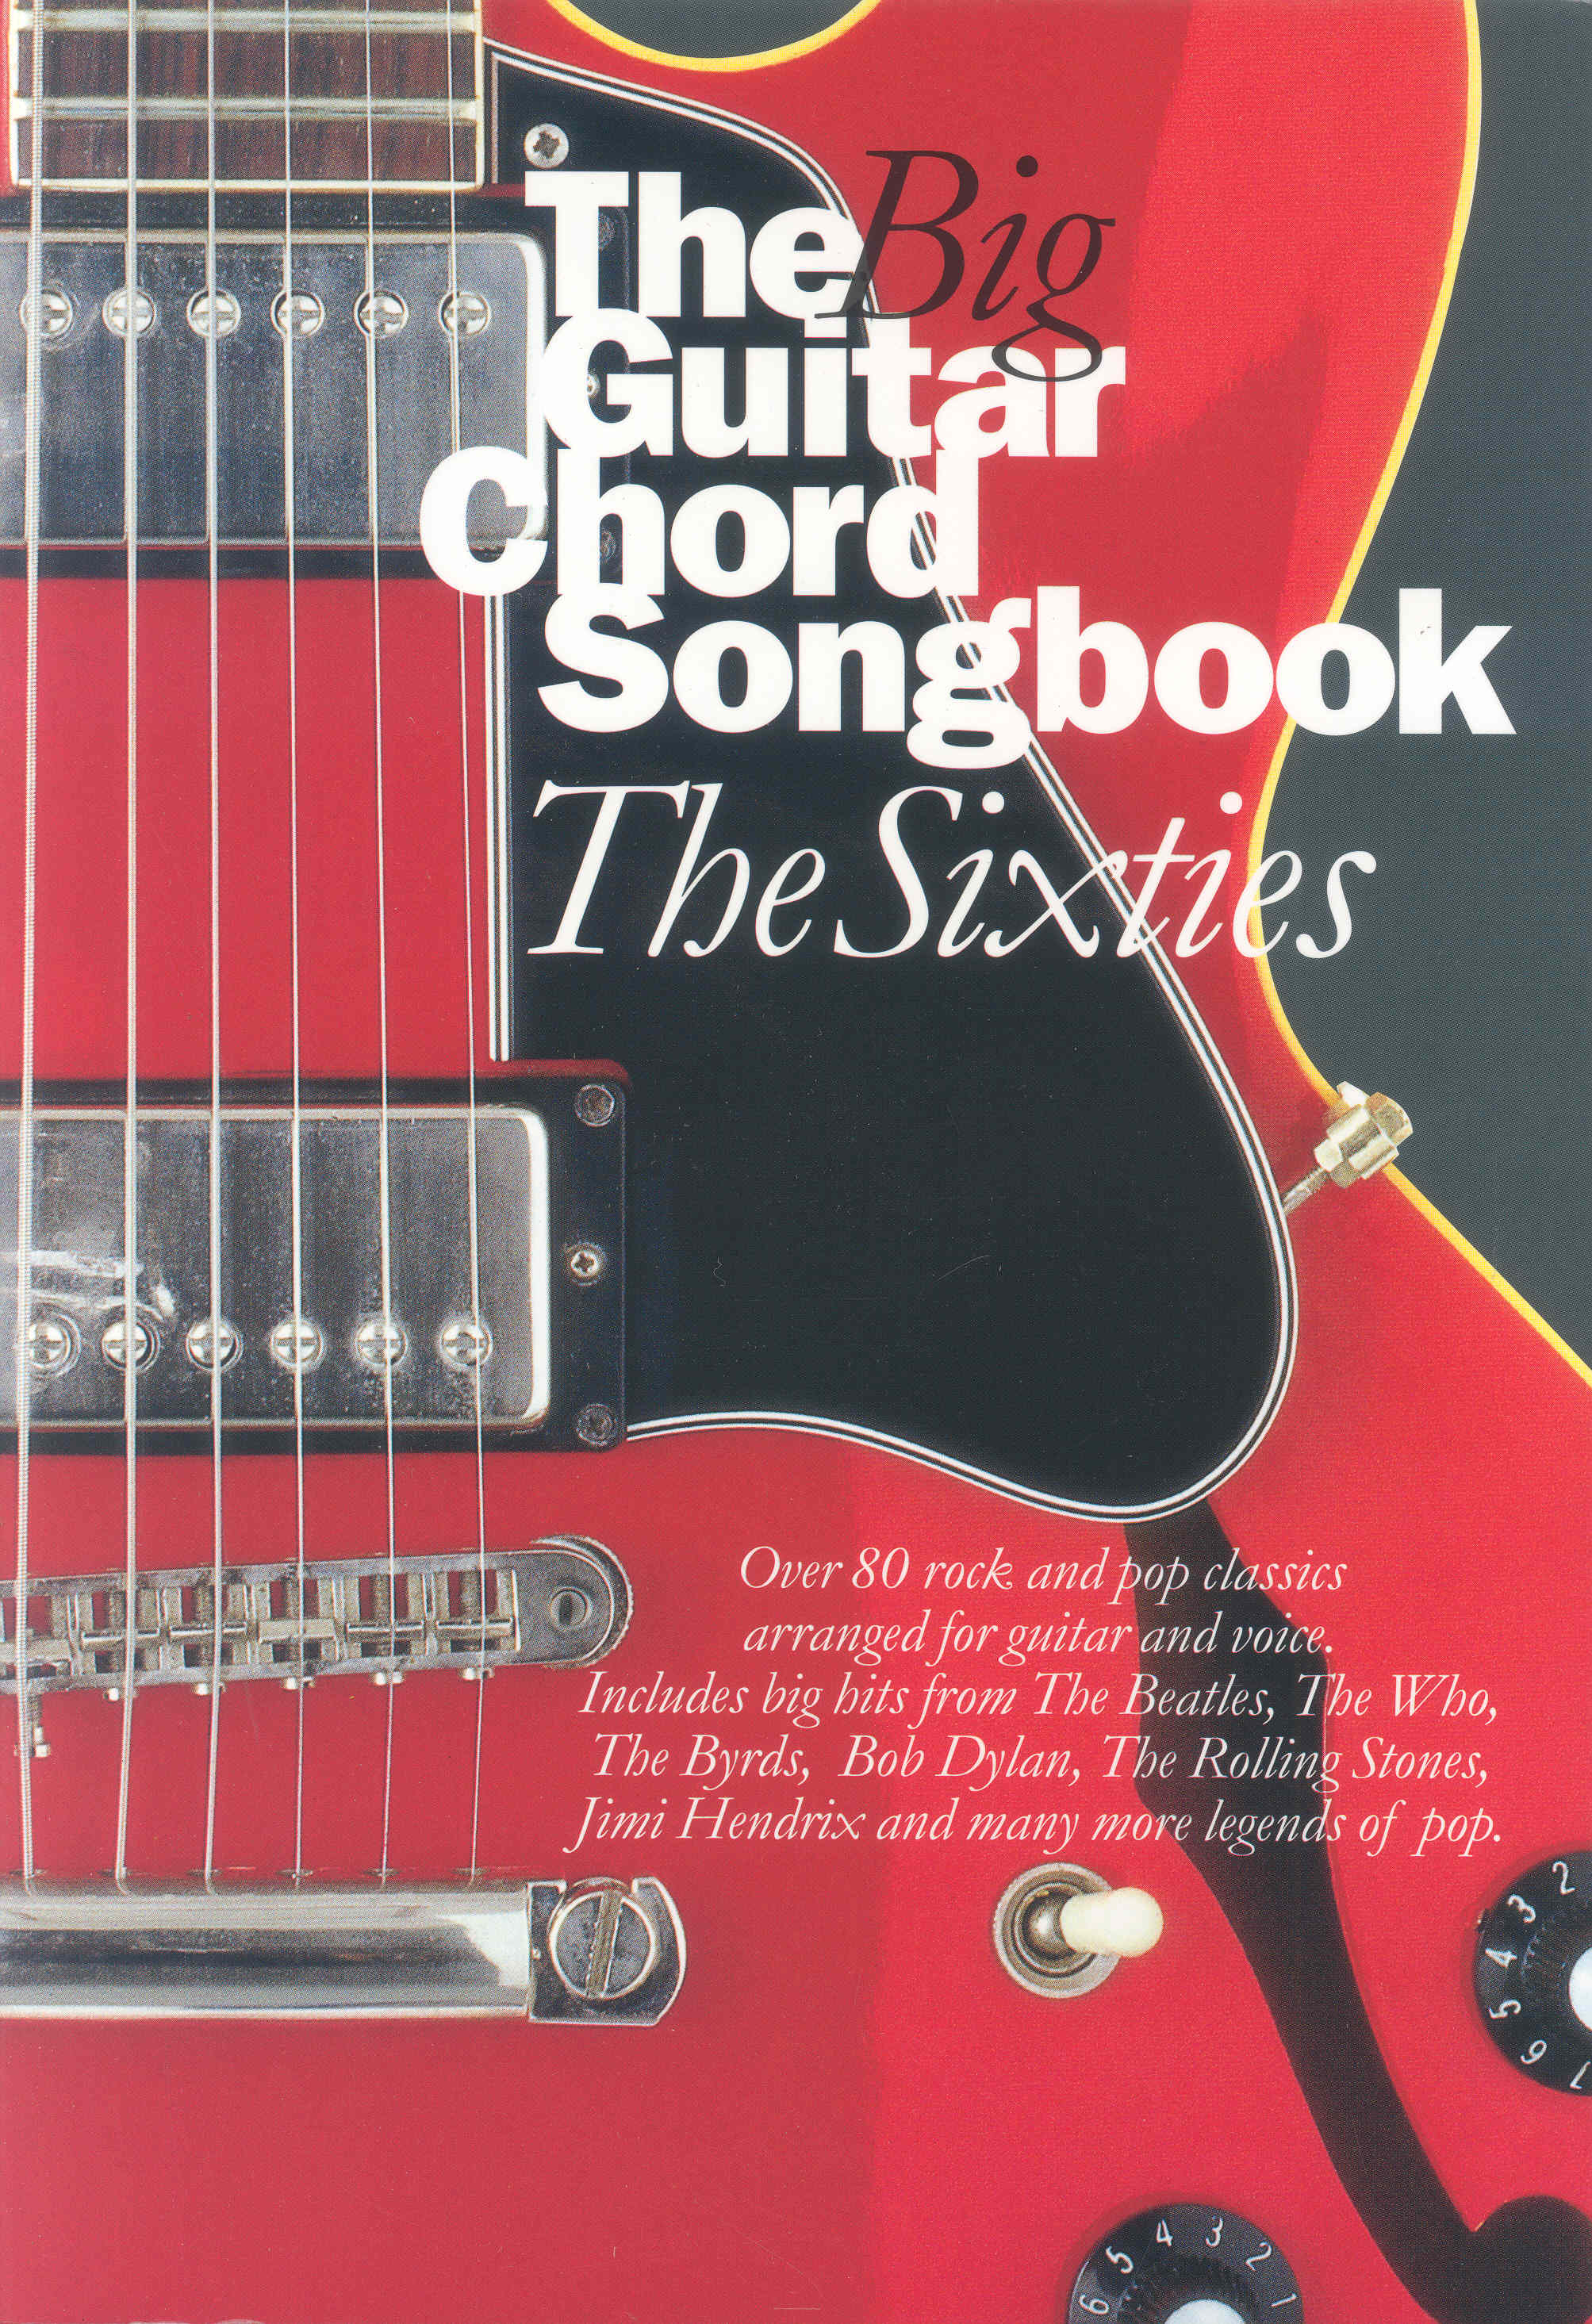 Big Guitar Chord Songbook The 60s Sheet Music Songbook